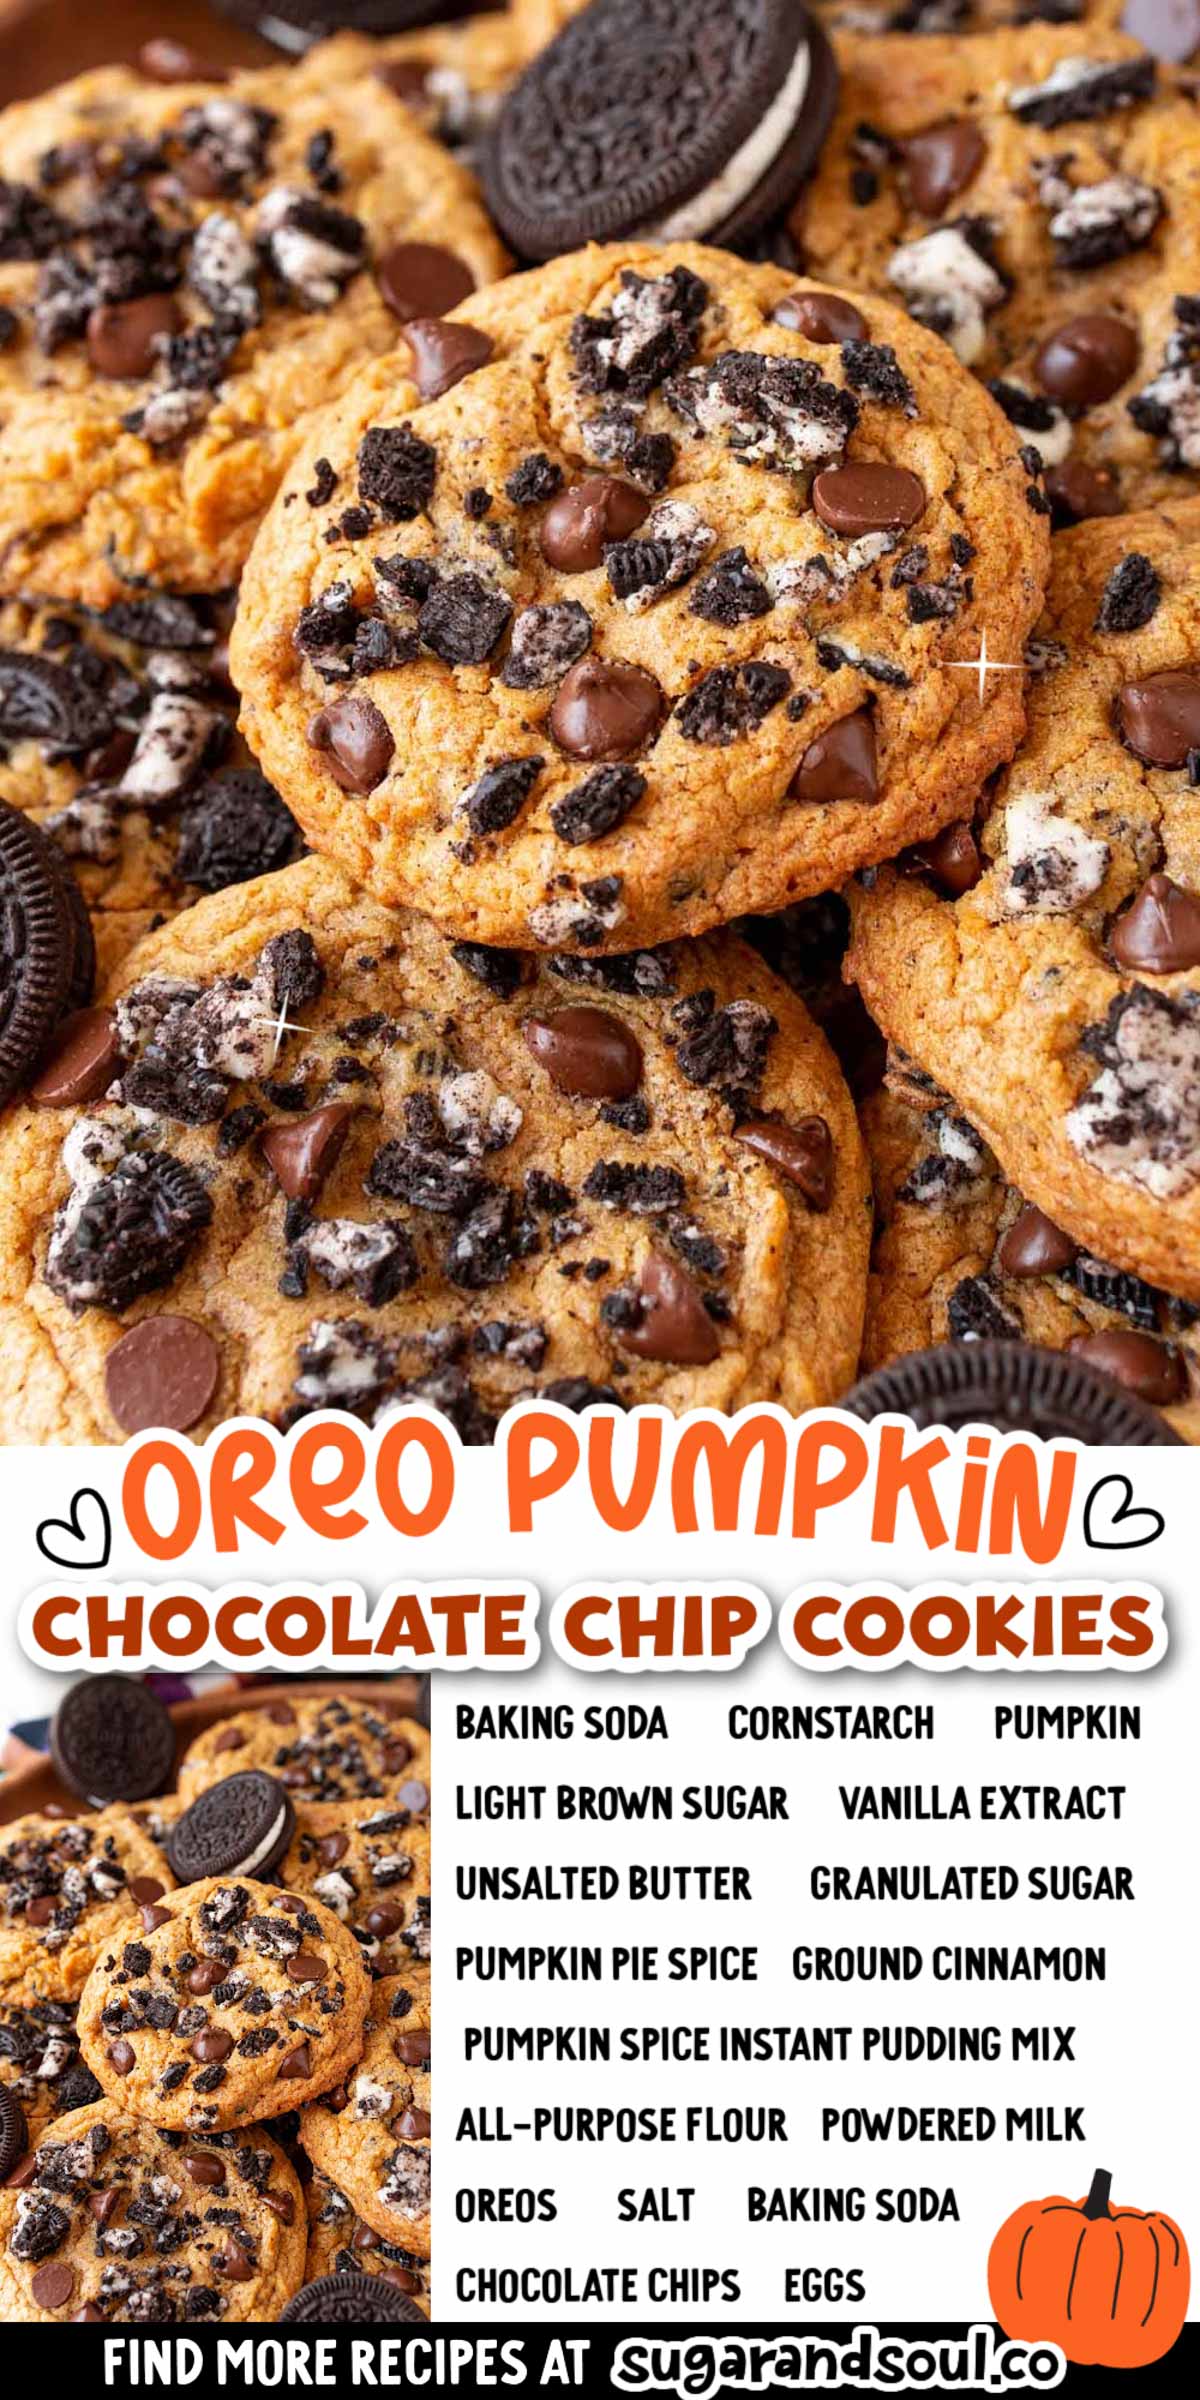 Oreo Pumpkin Chocolate Chip Cookies are big, soft, and chewy cookies that are loaded with pumpkin flavor, Oreo pieces, and chocolate chips! Each batch takes just 10 minutes to bake! via @sugarandsoulco